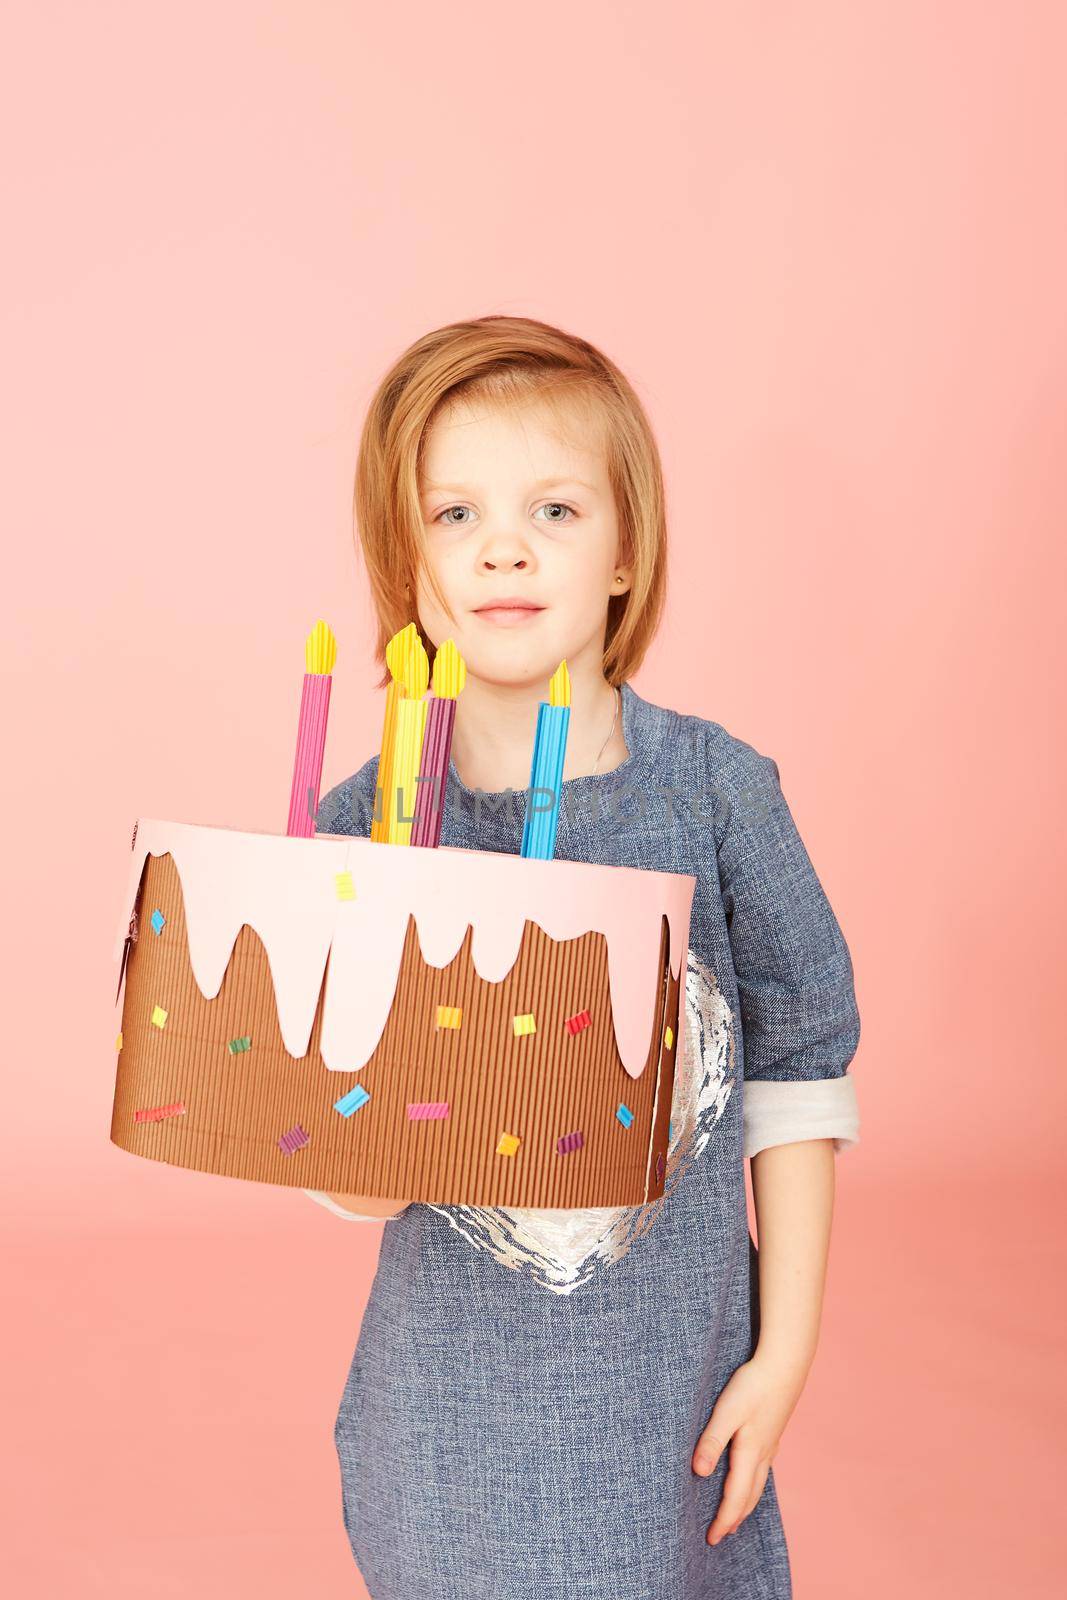 Portrait of an excited pretty little girl celebrating birthday and showing cake on over pink background